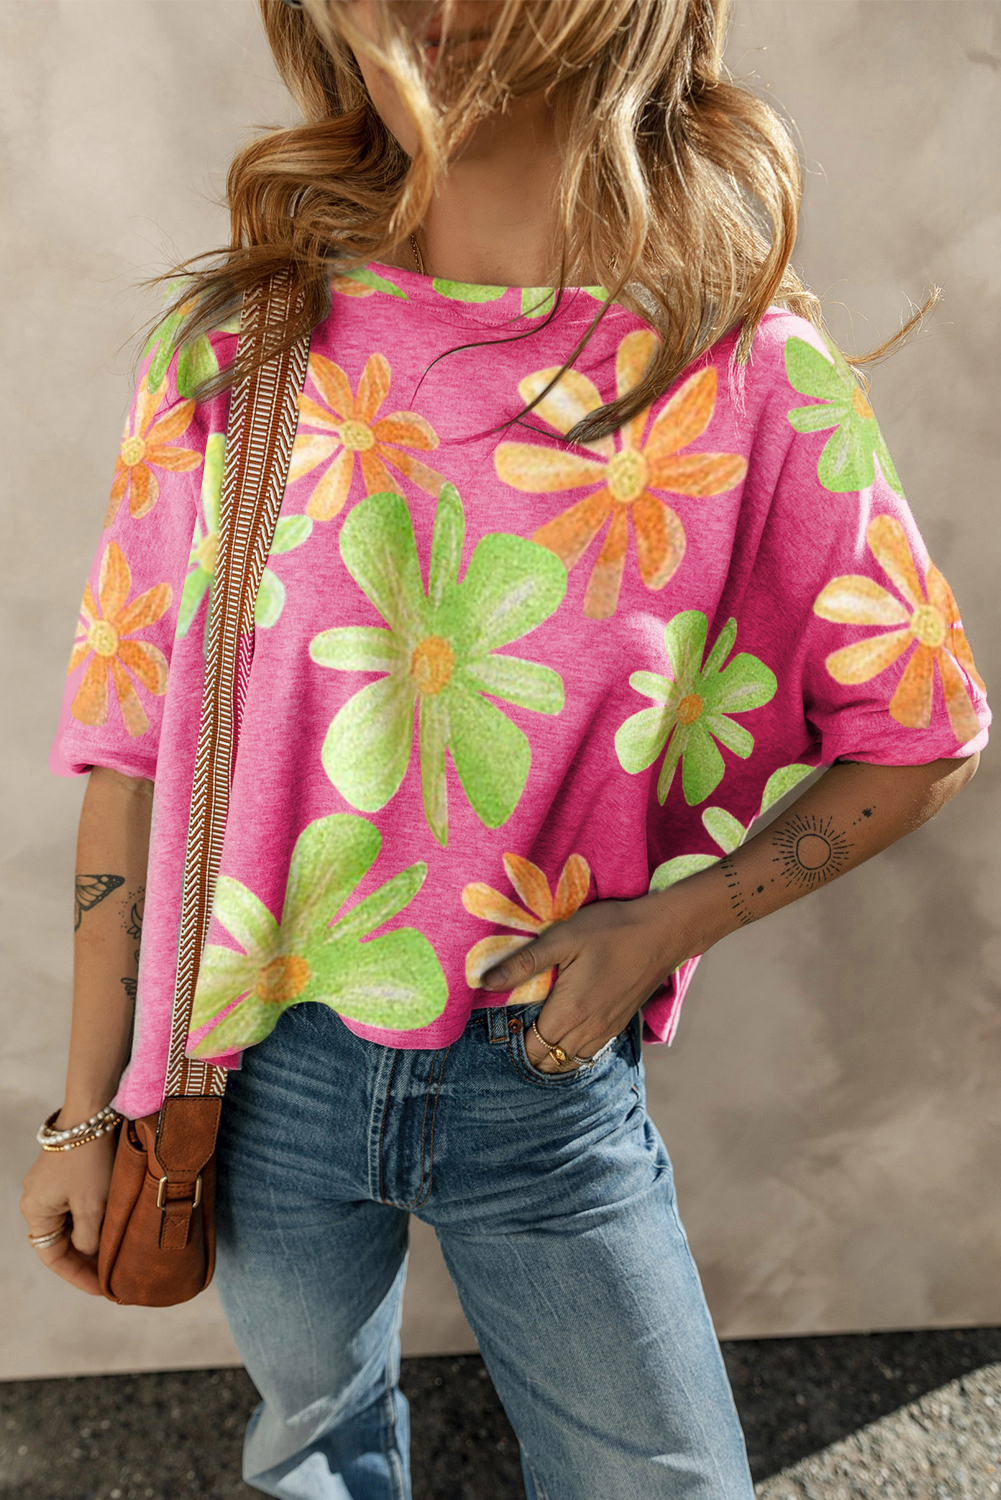 Shewin Wholesale Fashion Rose 60s Vintage FLOWER Print Batwing Sleeve T Shirt